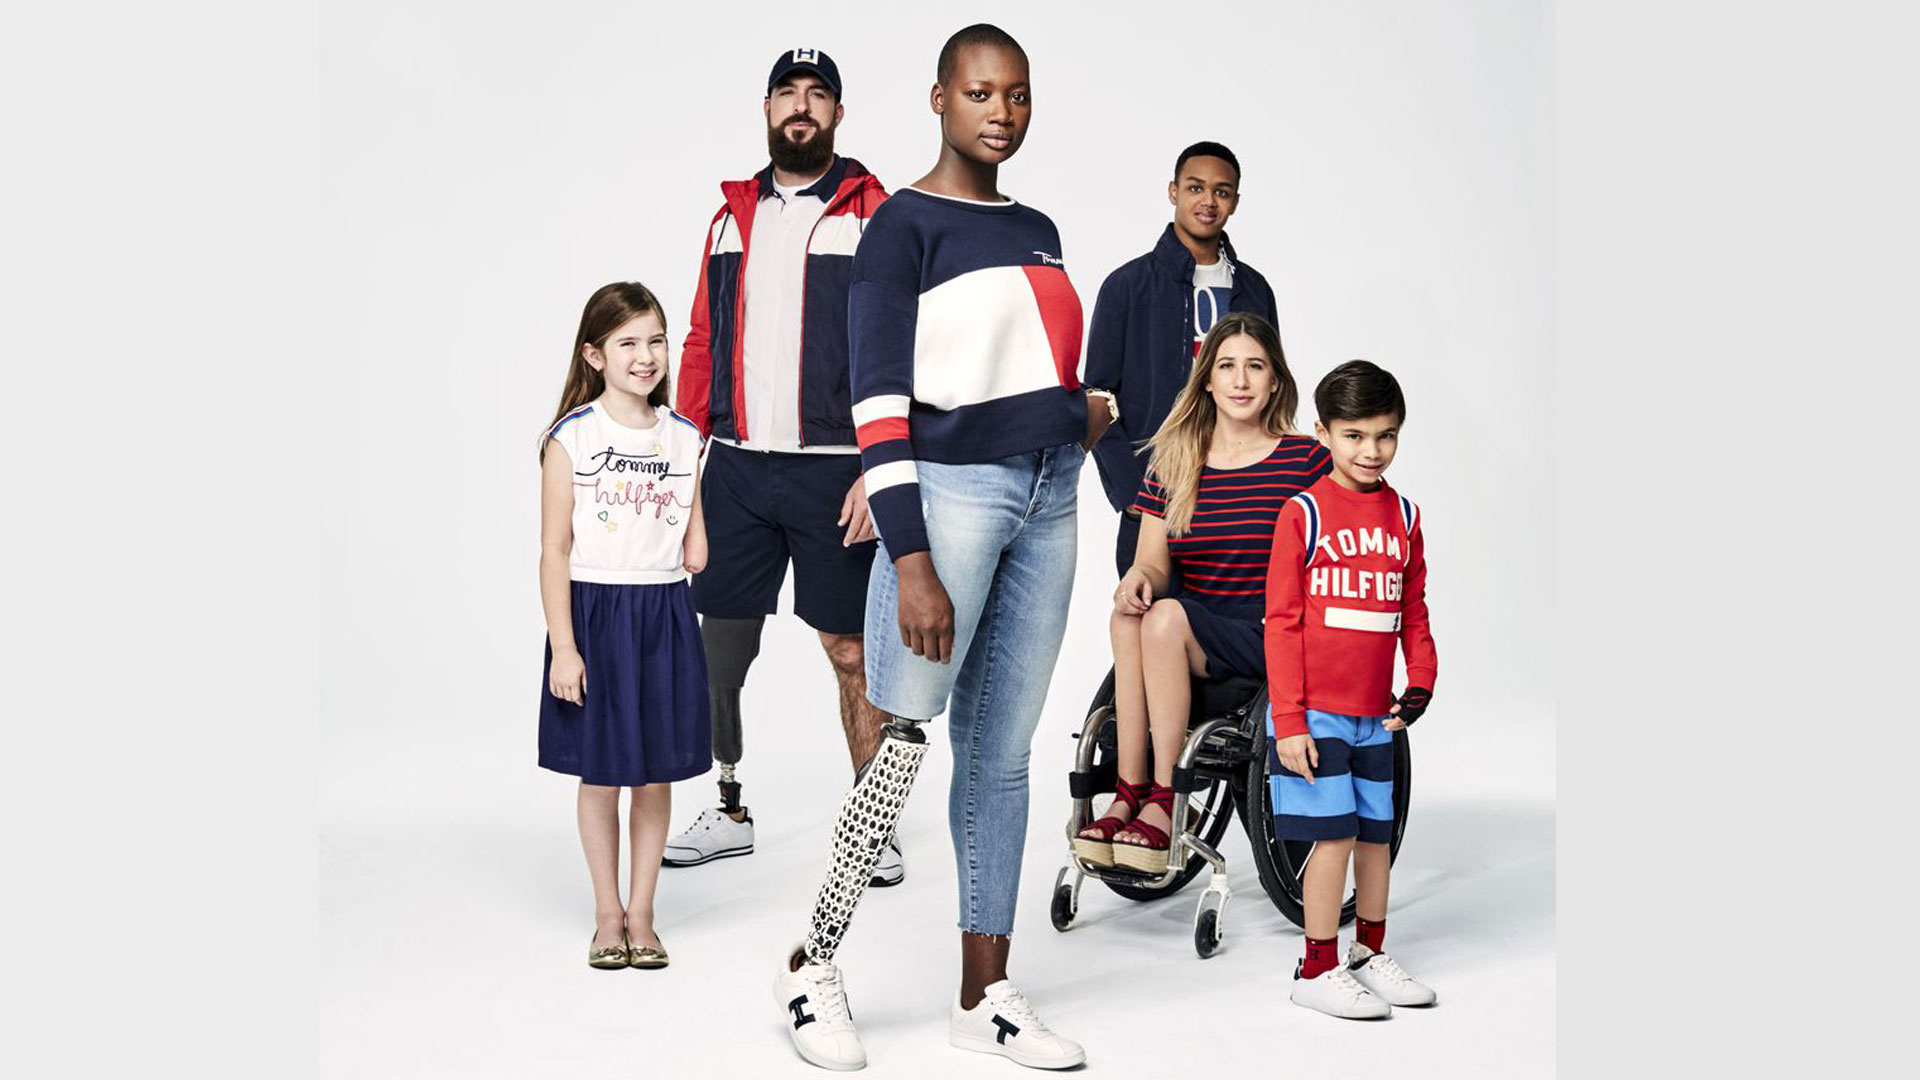 Tommy Hilfiger: Tommy Adaptive, Design solutions that make getting dressed easier for people with disabilities. 1920x1080 Full HD Wallpaper.